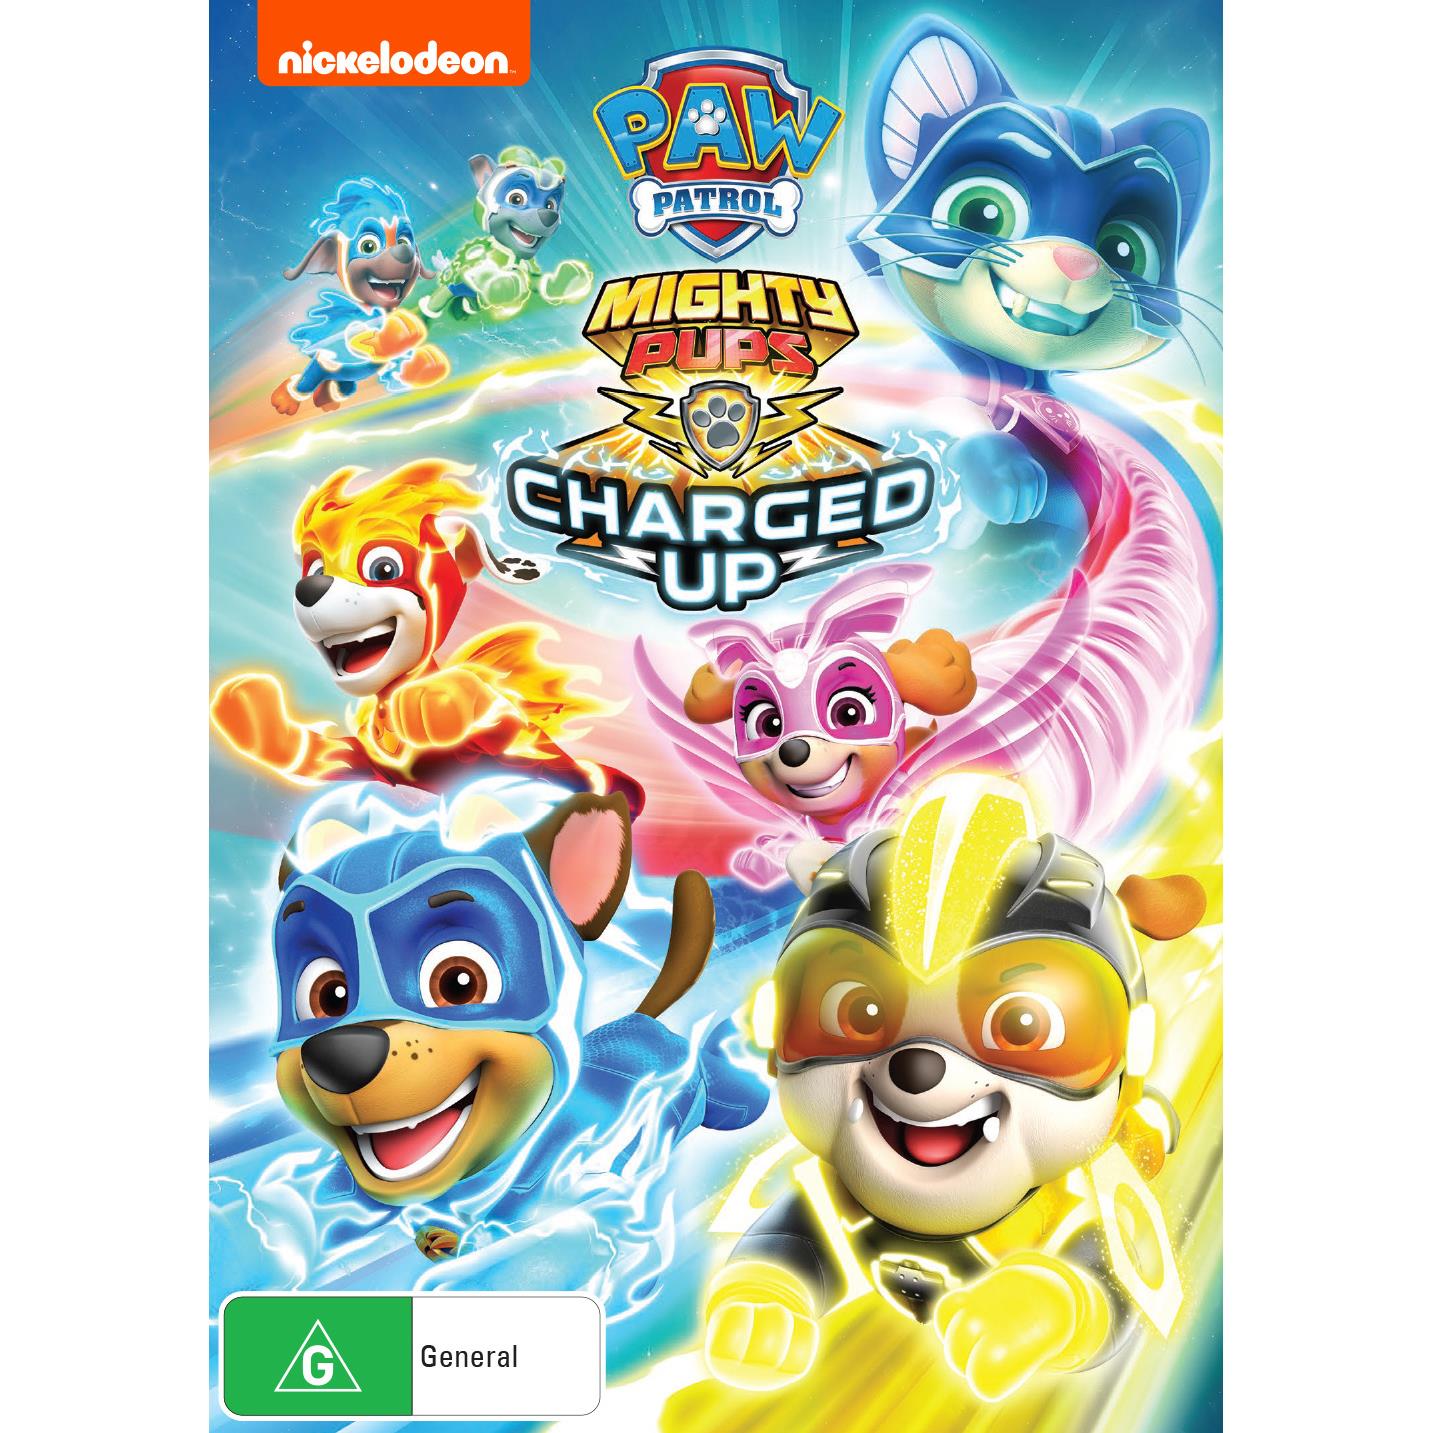 paw patrol: mighty pups charged up